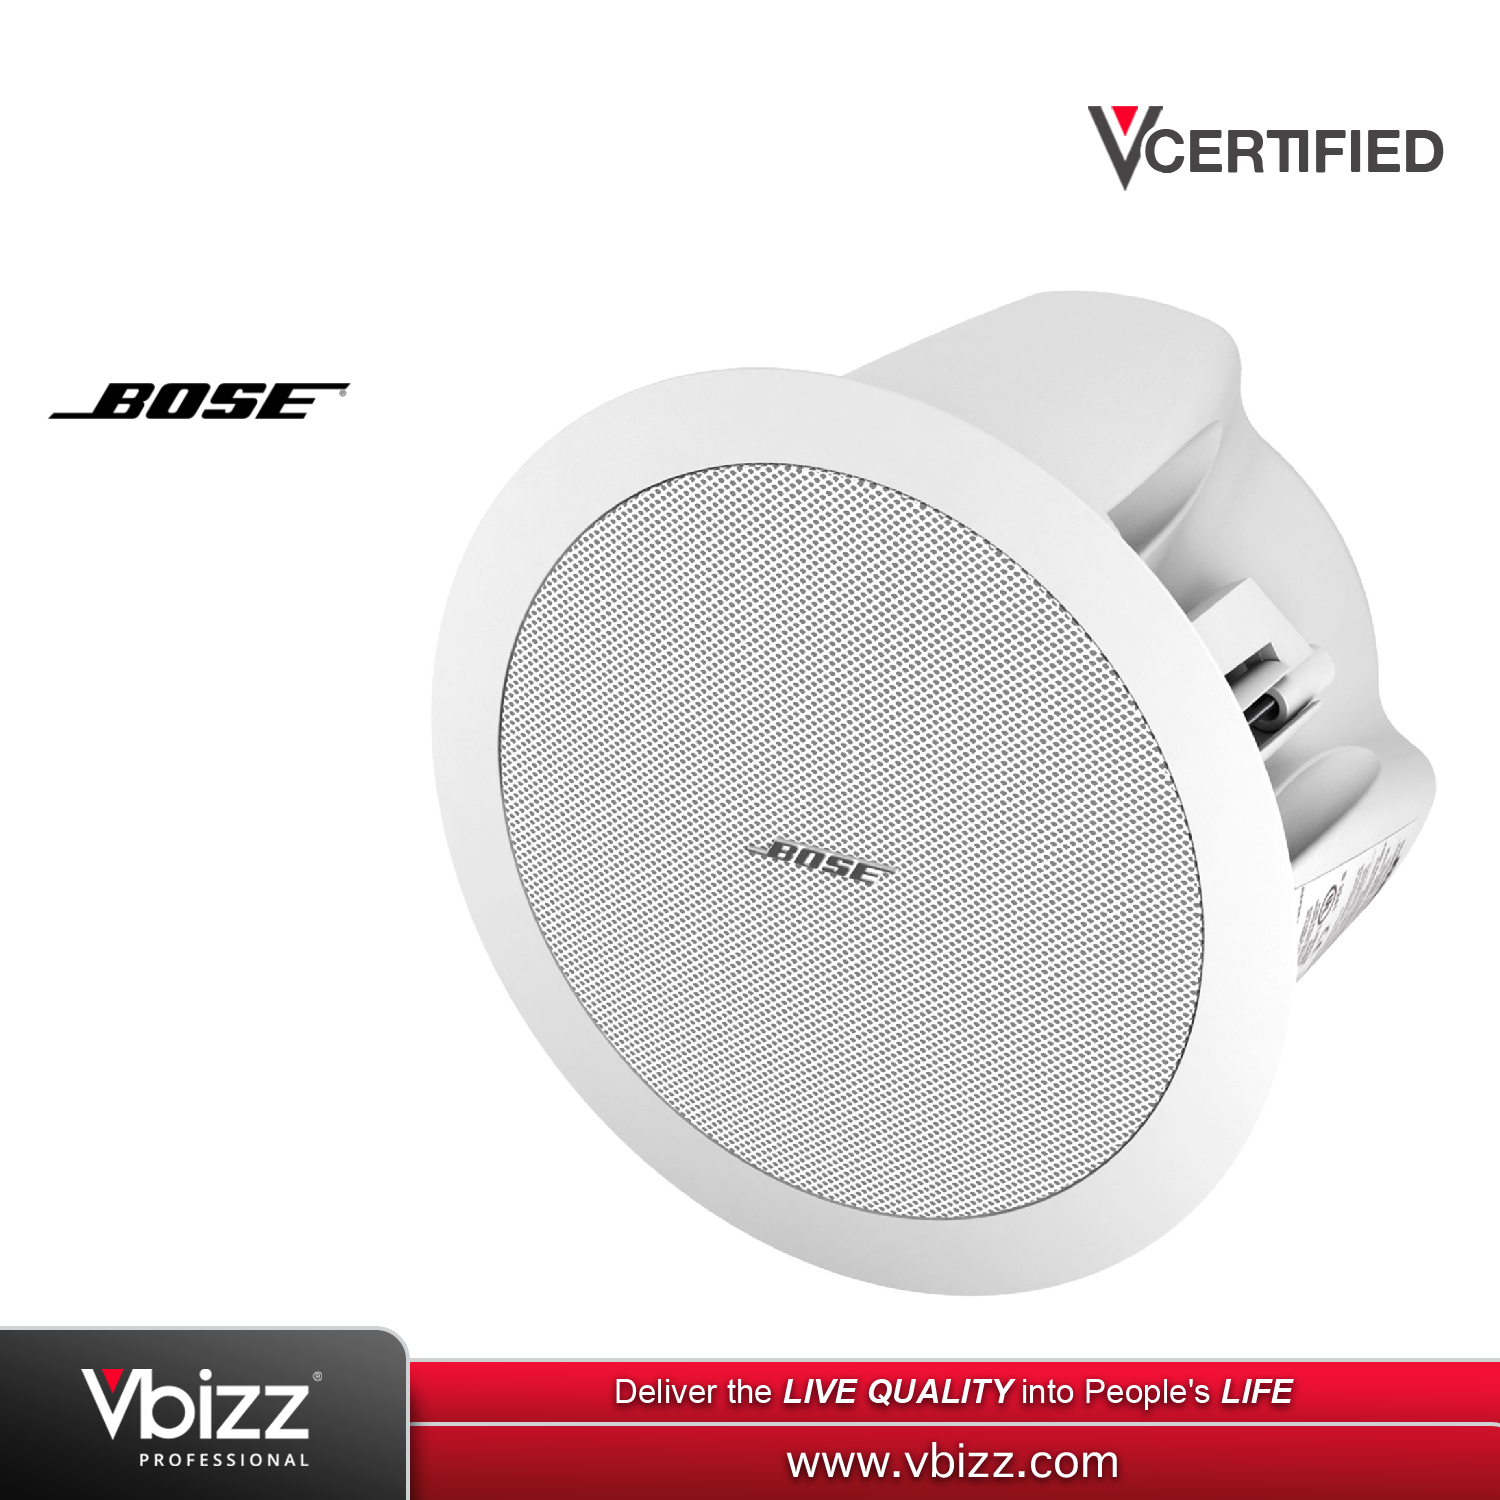 Bose Freee Ds 16f 2 25 16w Ceiling